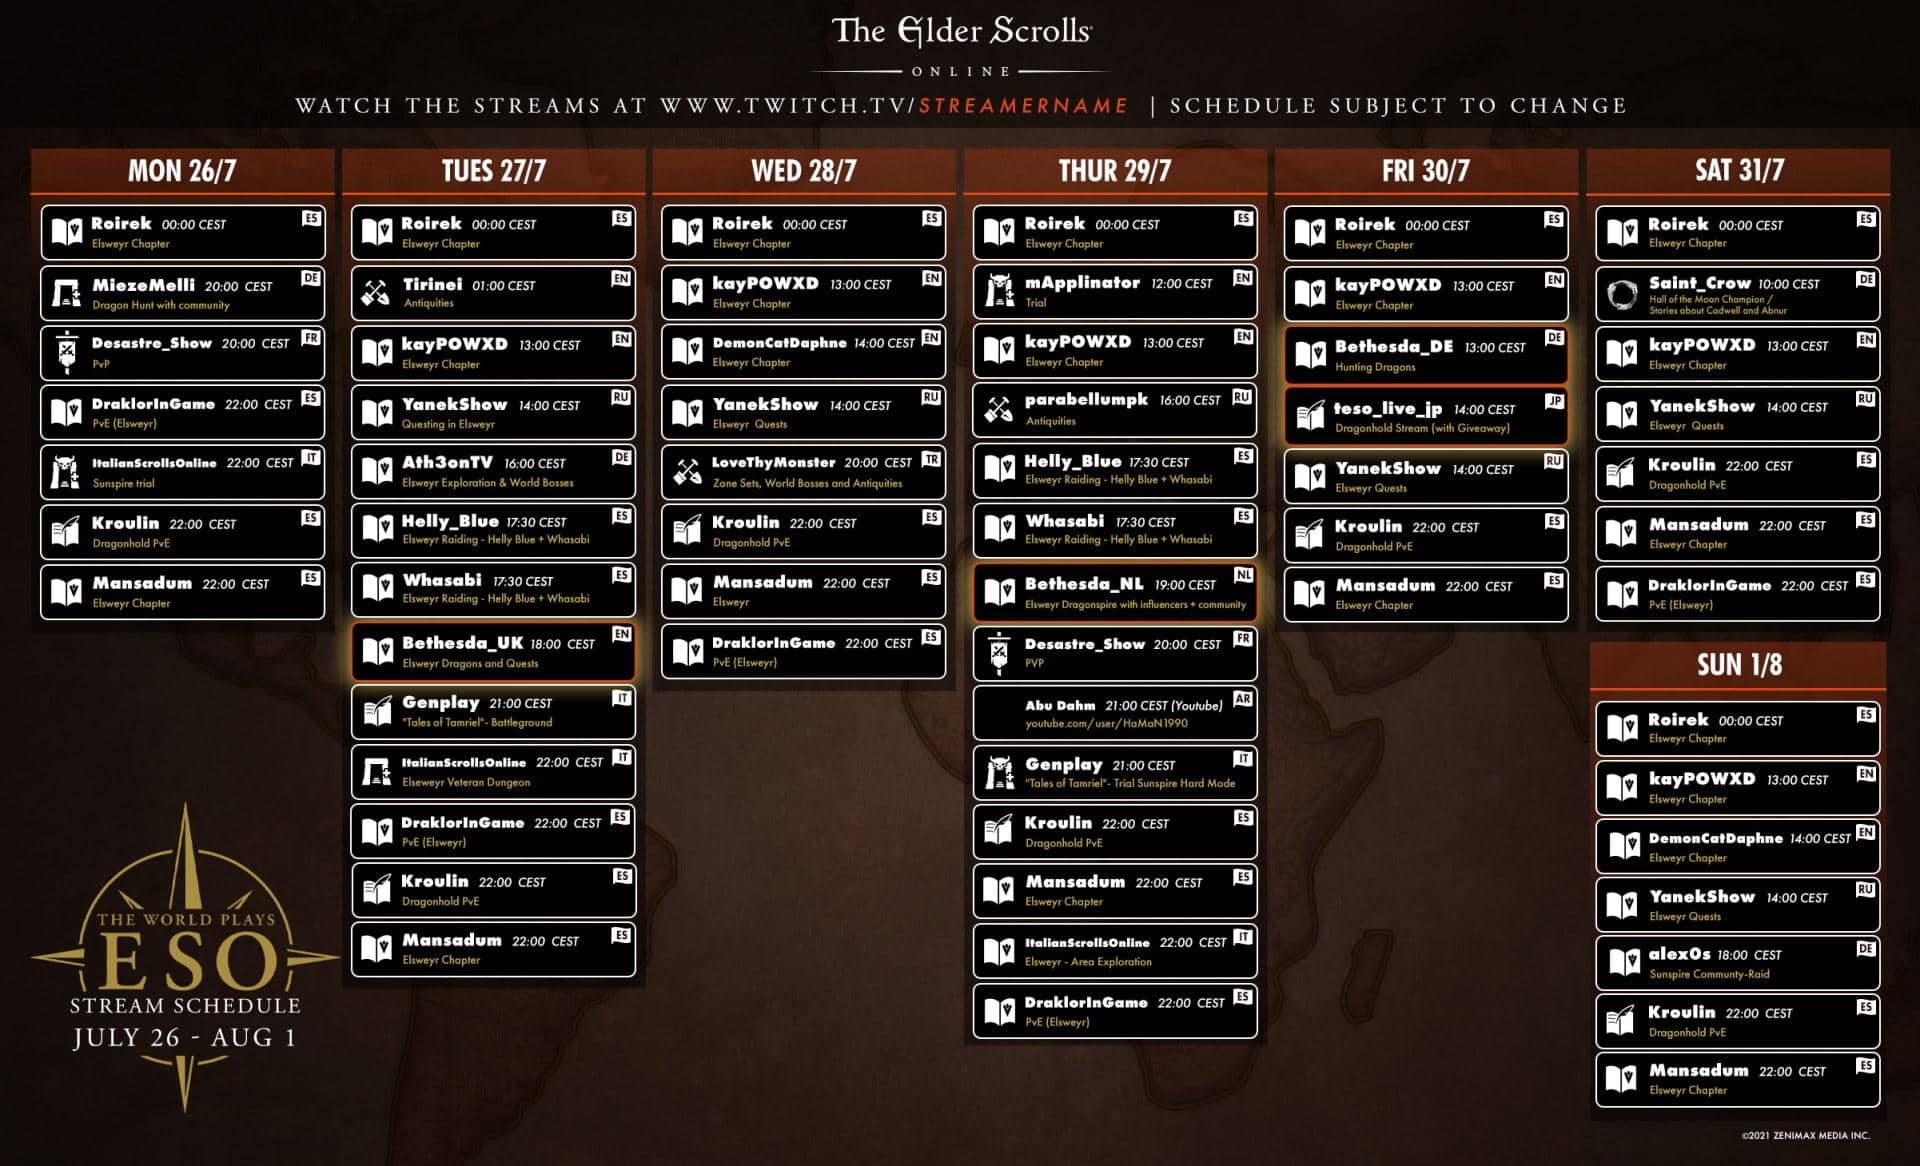 The World Plays ESO: July 19-August 1 Schedule & Participants - The